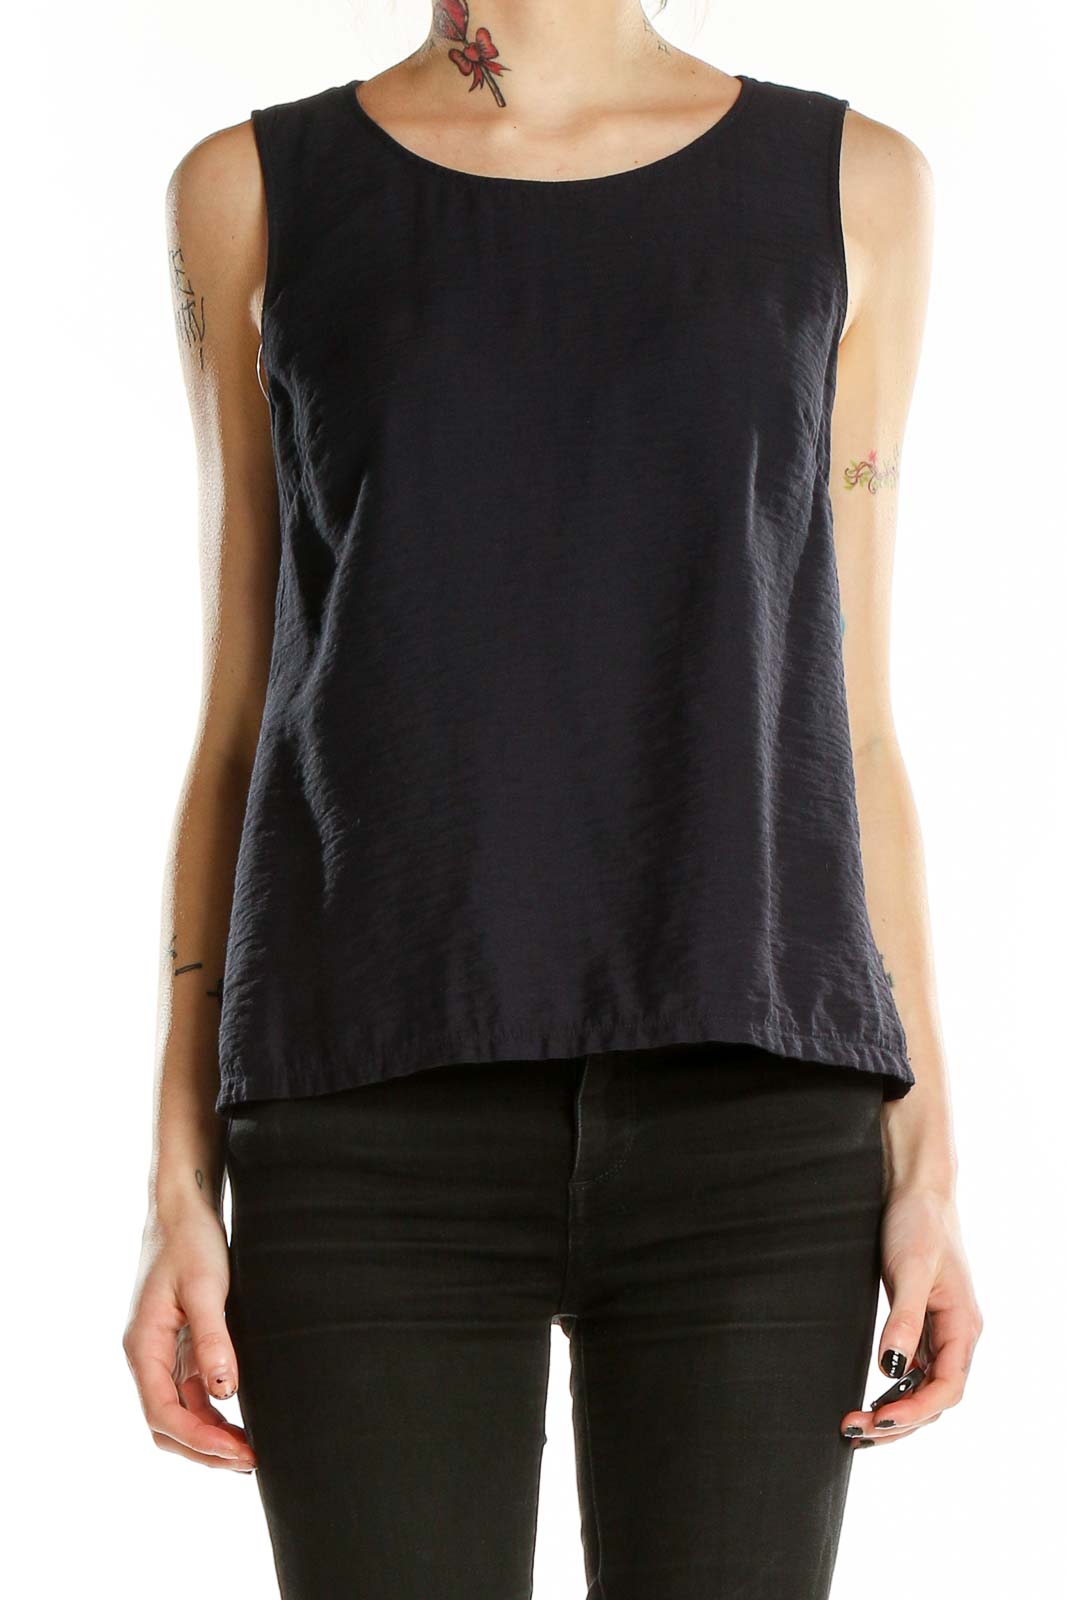 Navy Blue Sleeveless Top Front